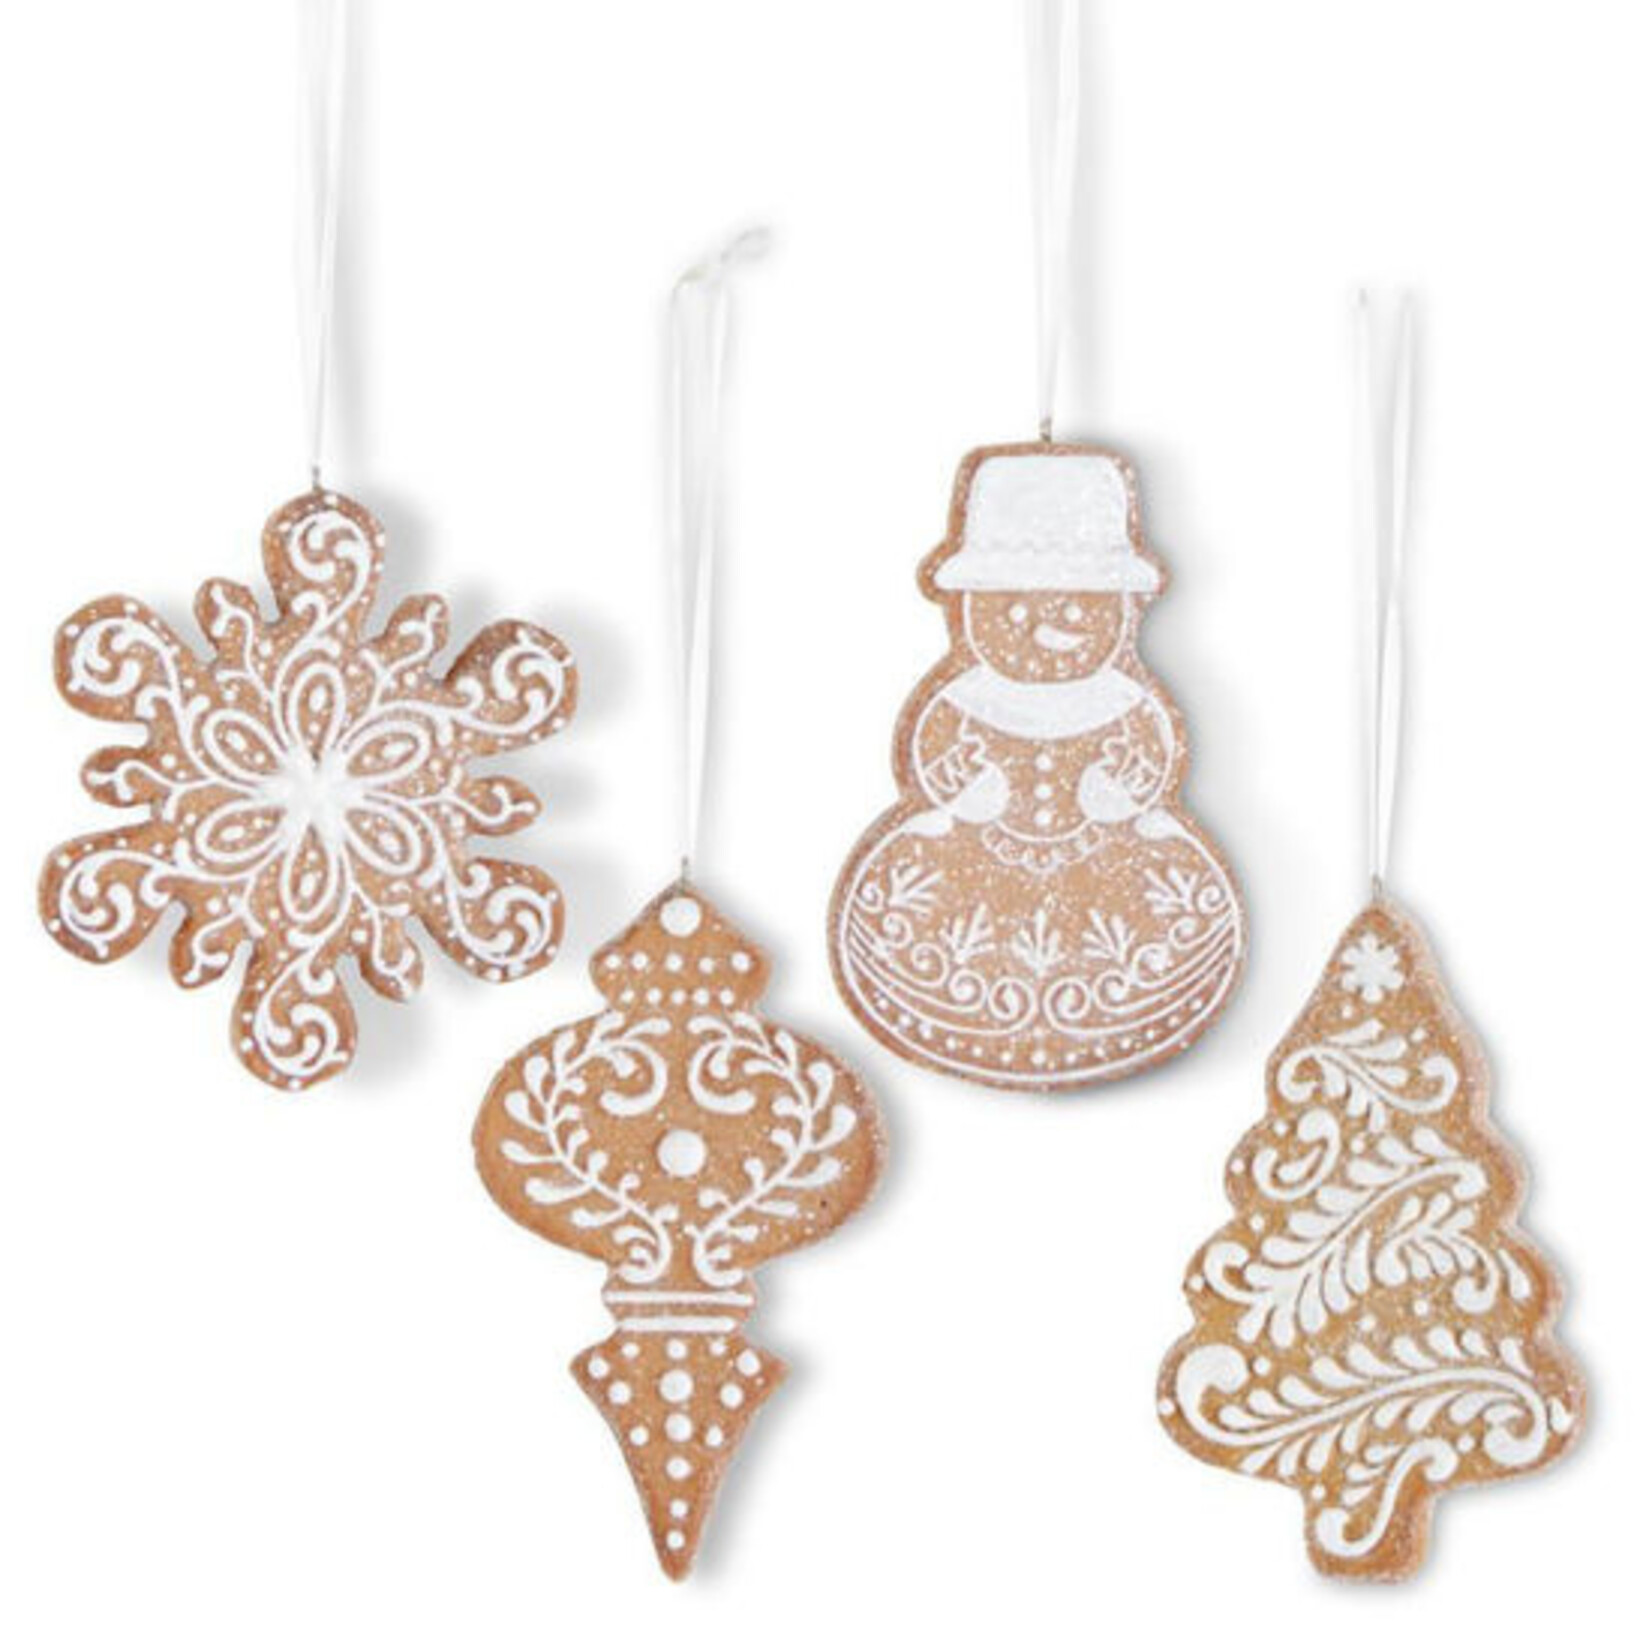 K&K Interiors Ornaments Brown Resin Glittered Gingerbread Assorted